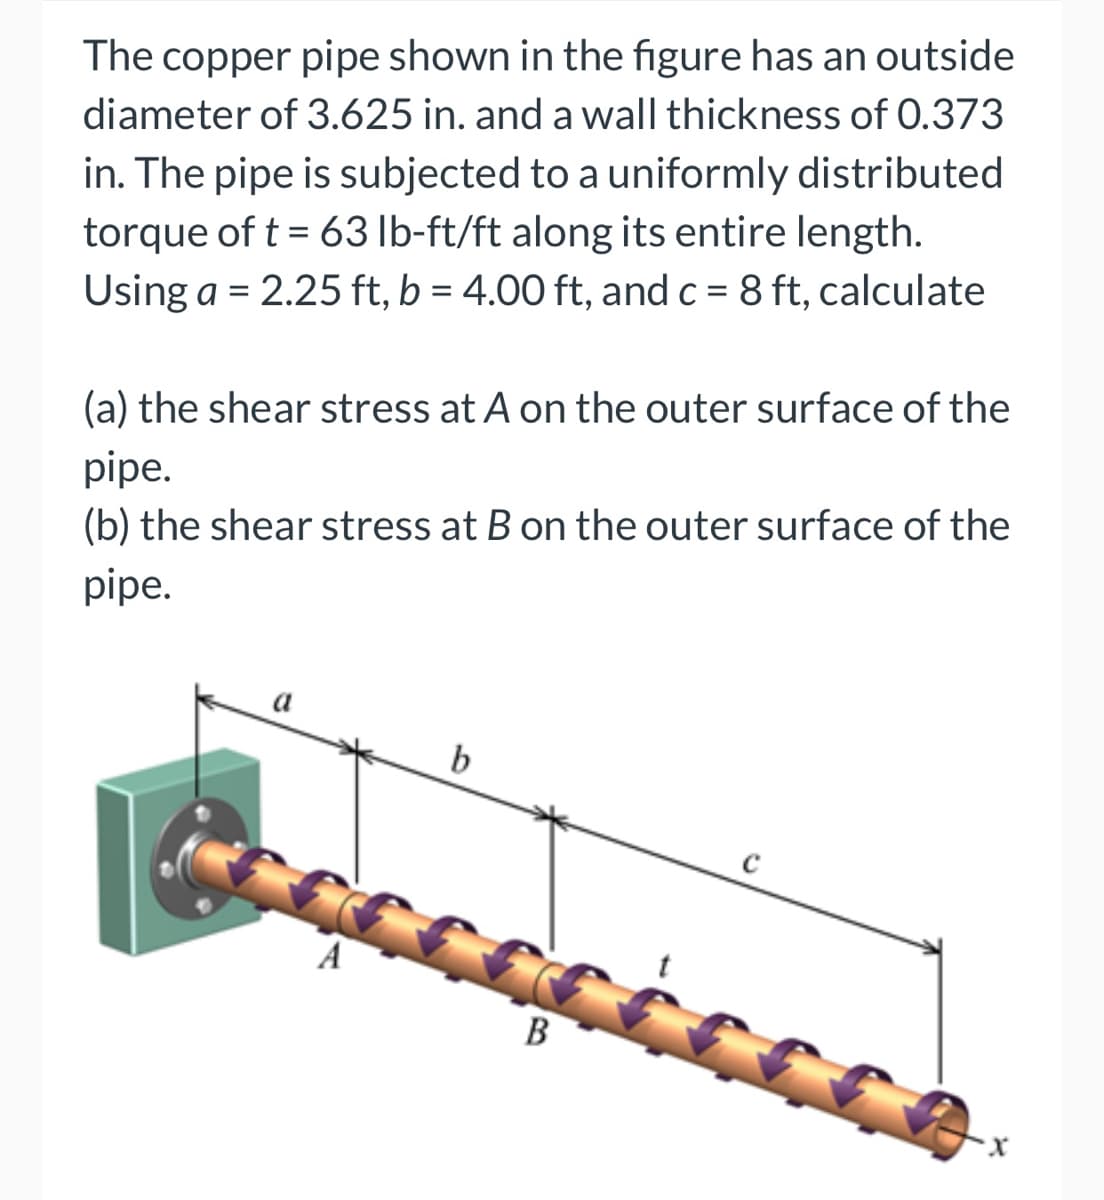 The copper pipe shown in the figure has an outside
diameter of 3.625 in. and a wall thickness of 0.373
in. The pipe is subjected to a uniformly distributed
torque of t = 63 lb-ft/ft along its entire length.
Using a = 2.25 ft, b = 4.00 ft, and c = 8 ft, calculate
(a) the shear stress at A on the outer surface of the
pipe.
(b) the shear stress at B on the outer surface of the
pipe.
b
cccccccccc
B
A
с
X